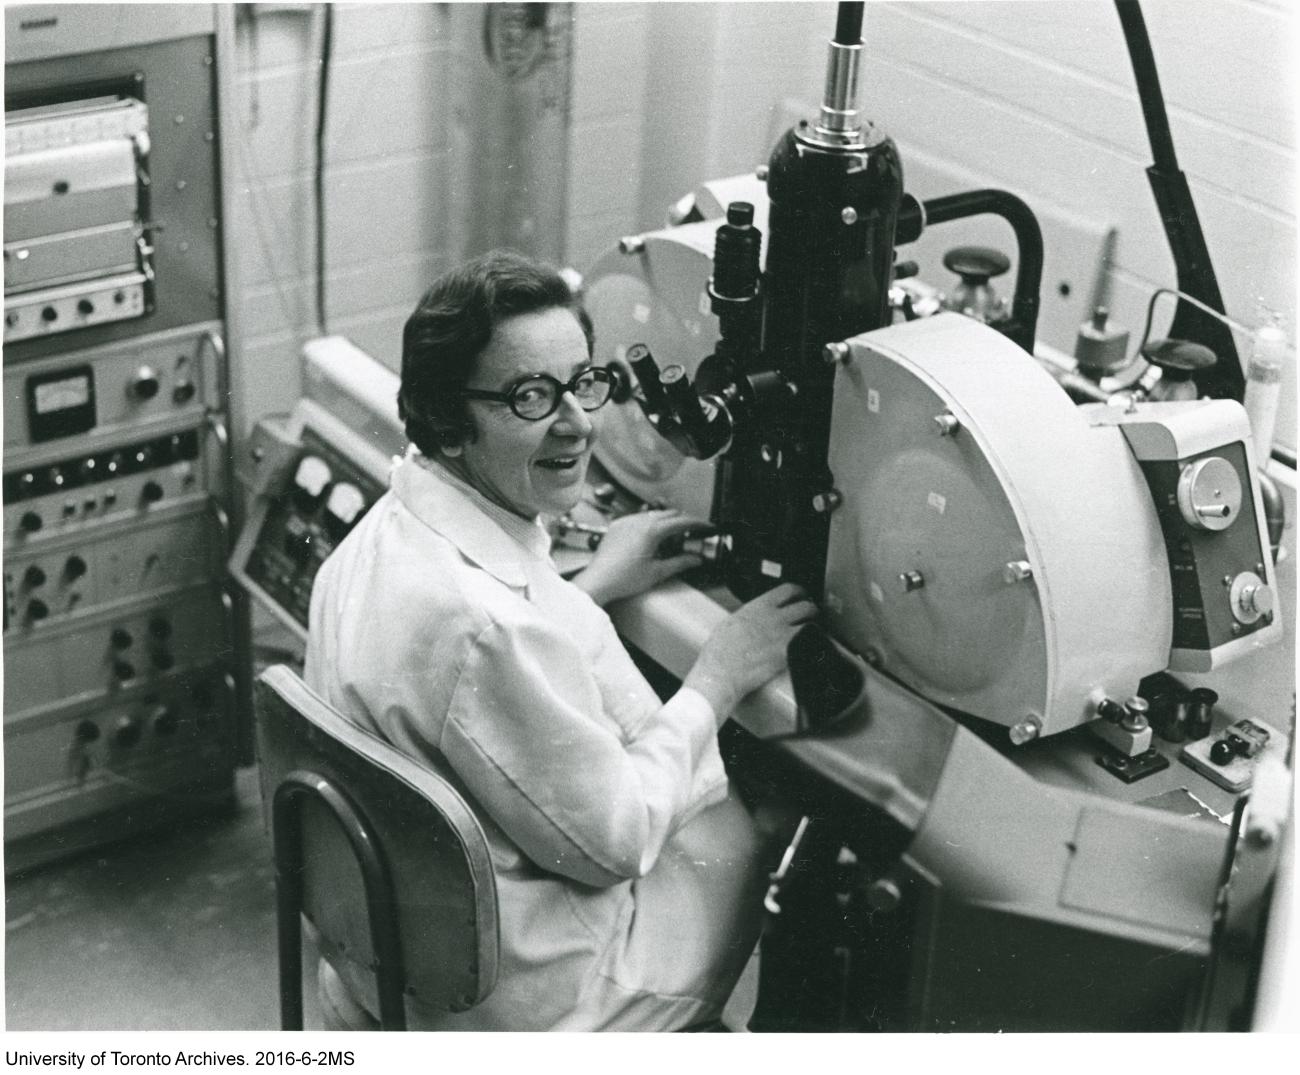 A scientist smiles at the camera from her place in front of a microscope